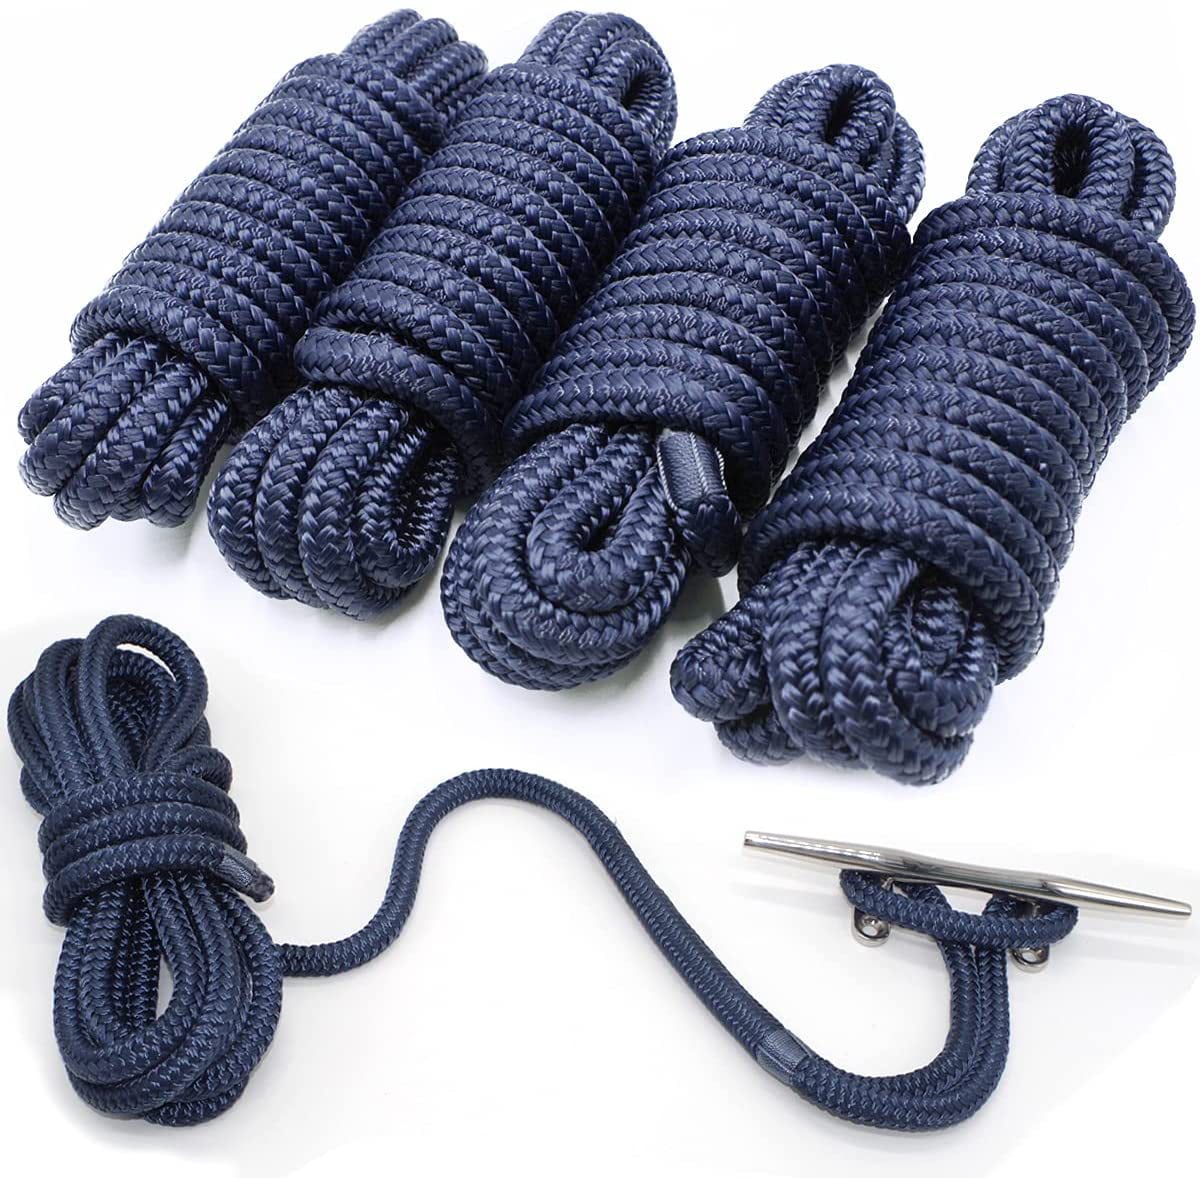 NAVY BLUE Solid Braid Nylon Dock Line / Fade Proof / USA 3/8" x 15' 2-PACK! 